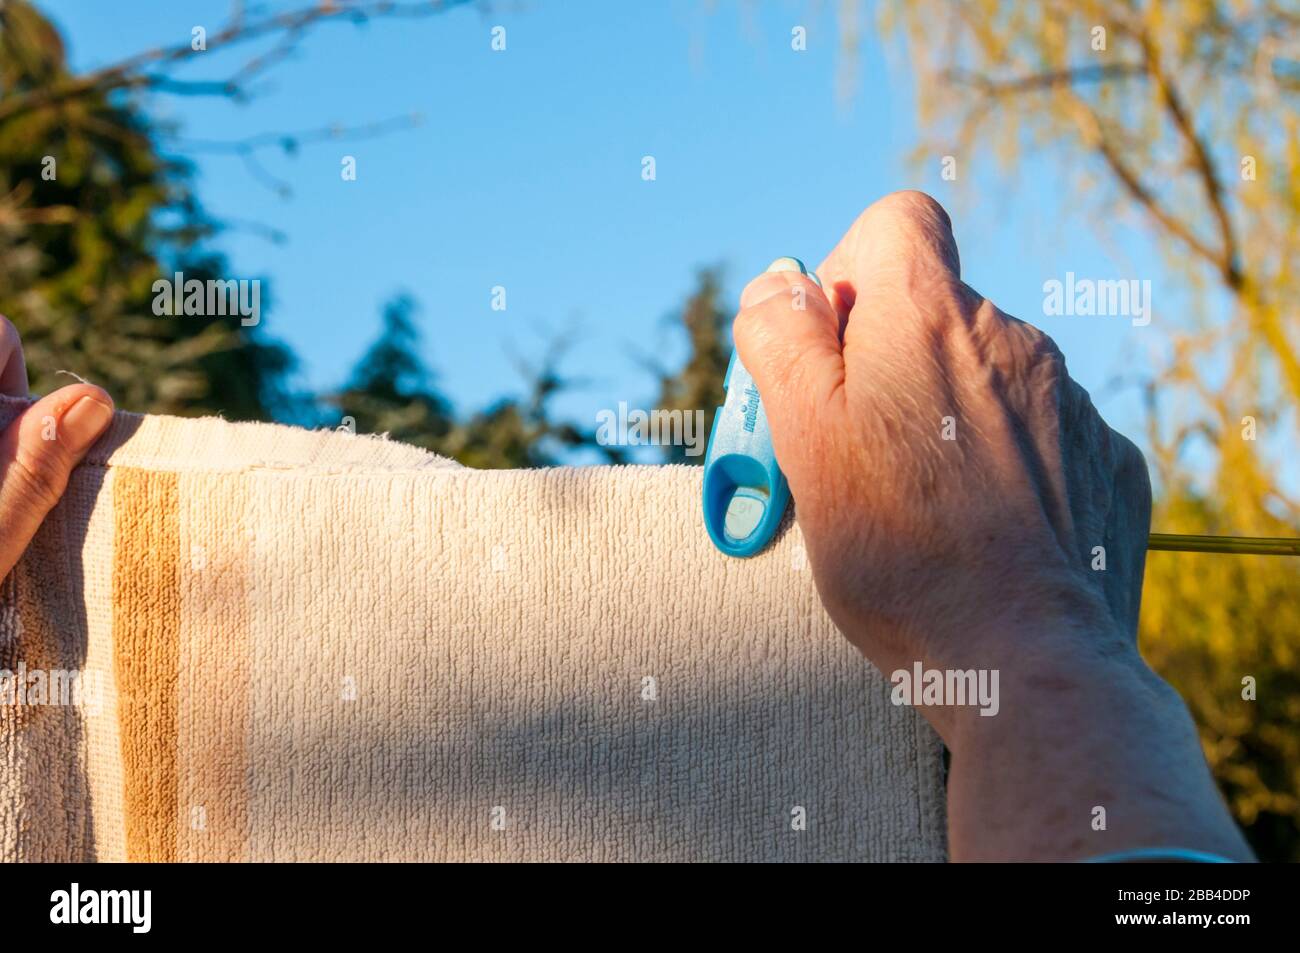 Woman pegging a washed towel onto a clothesline to dry. Stock Photo